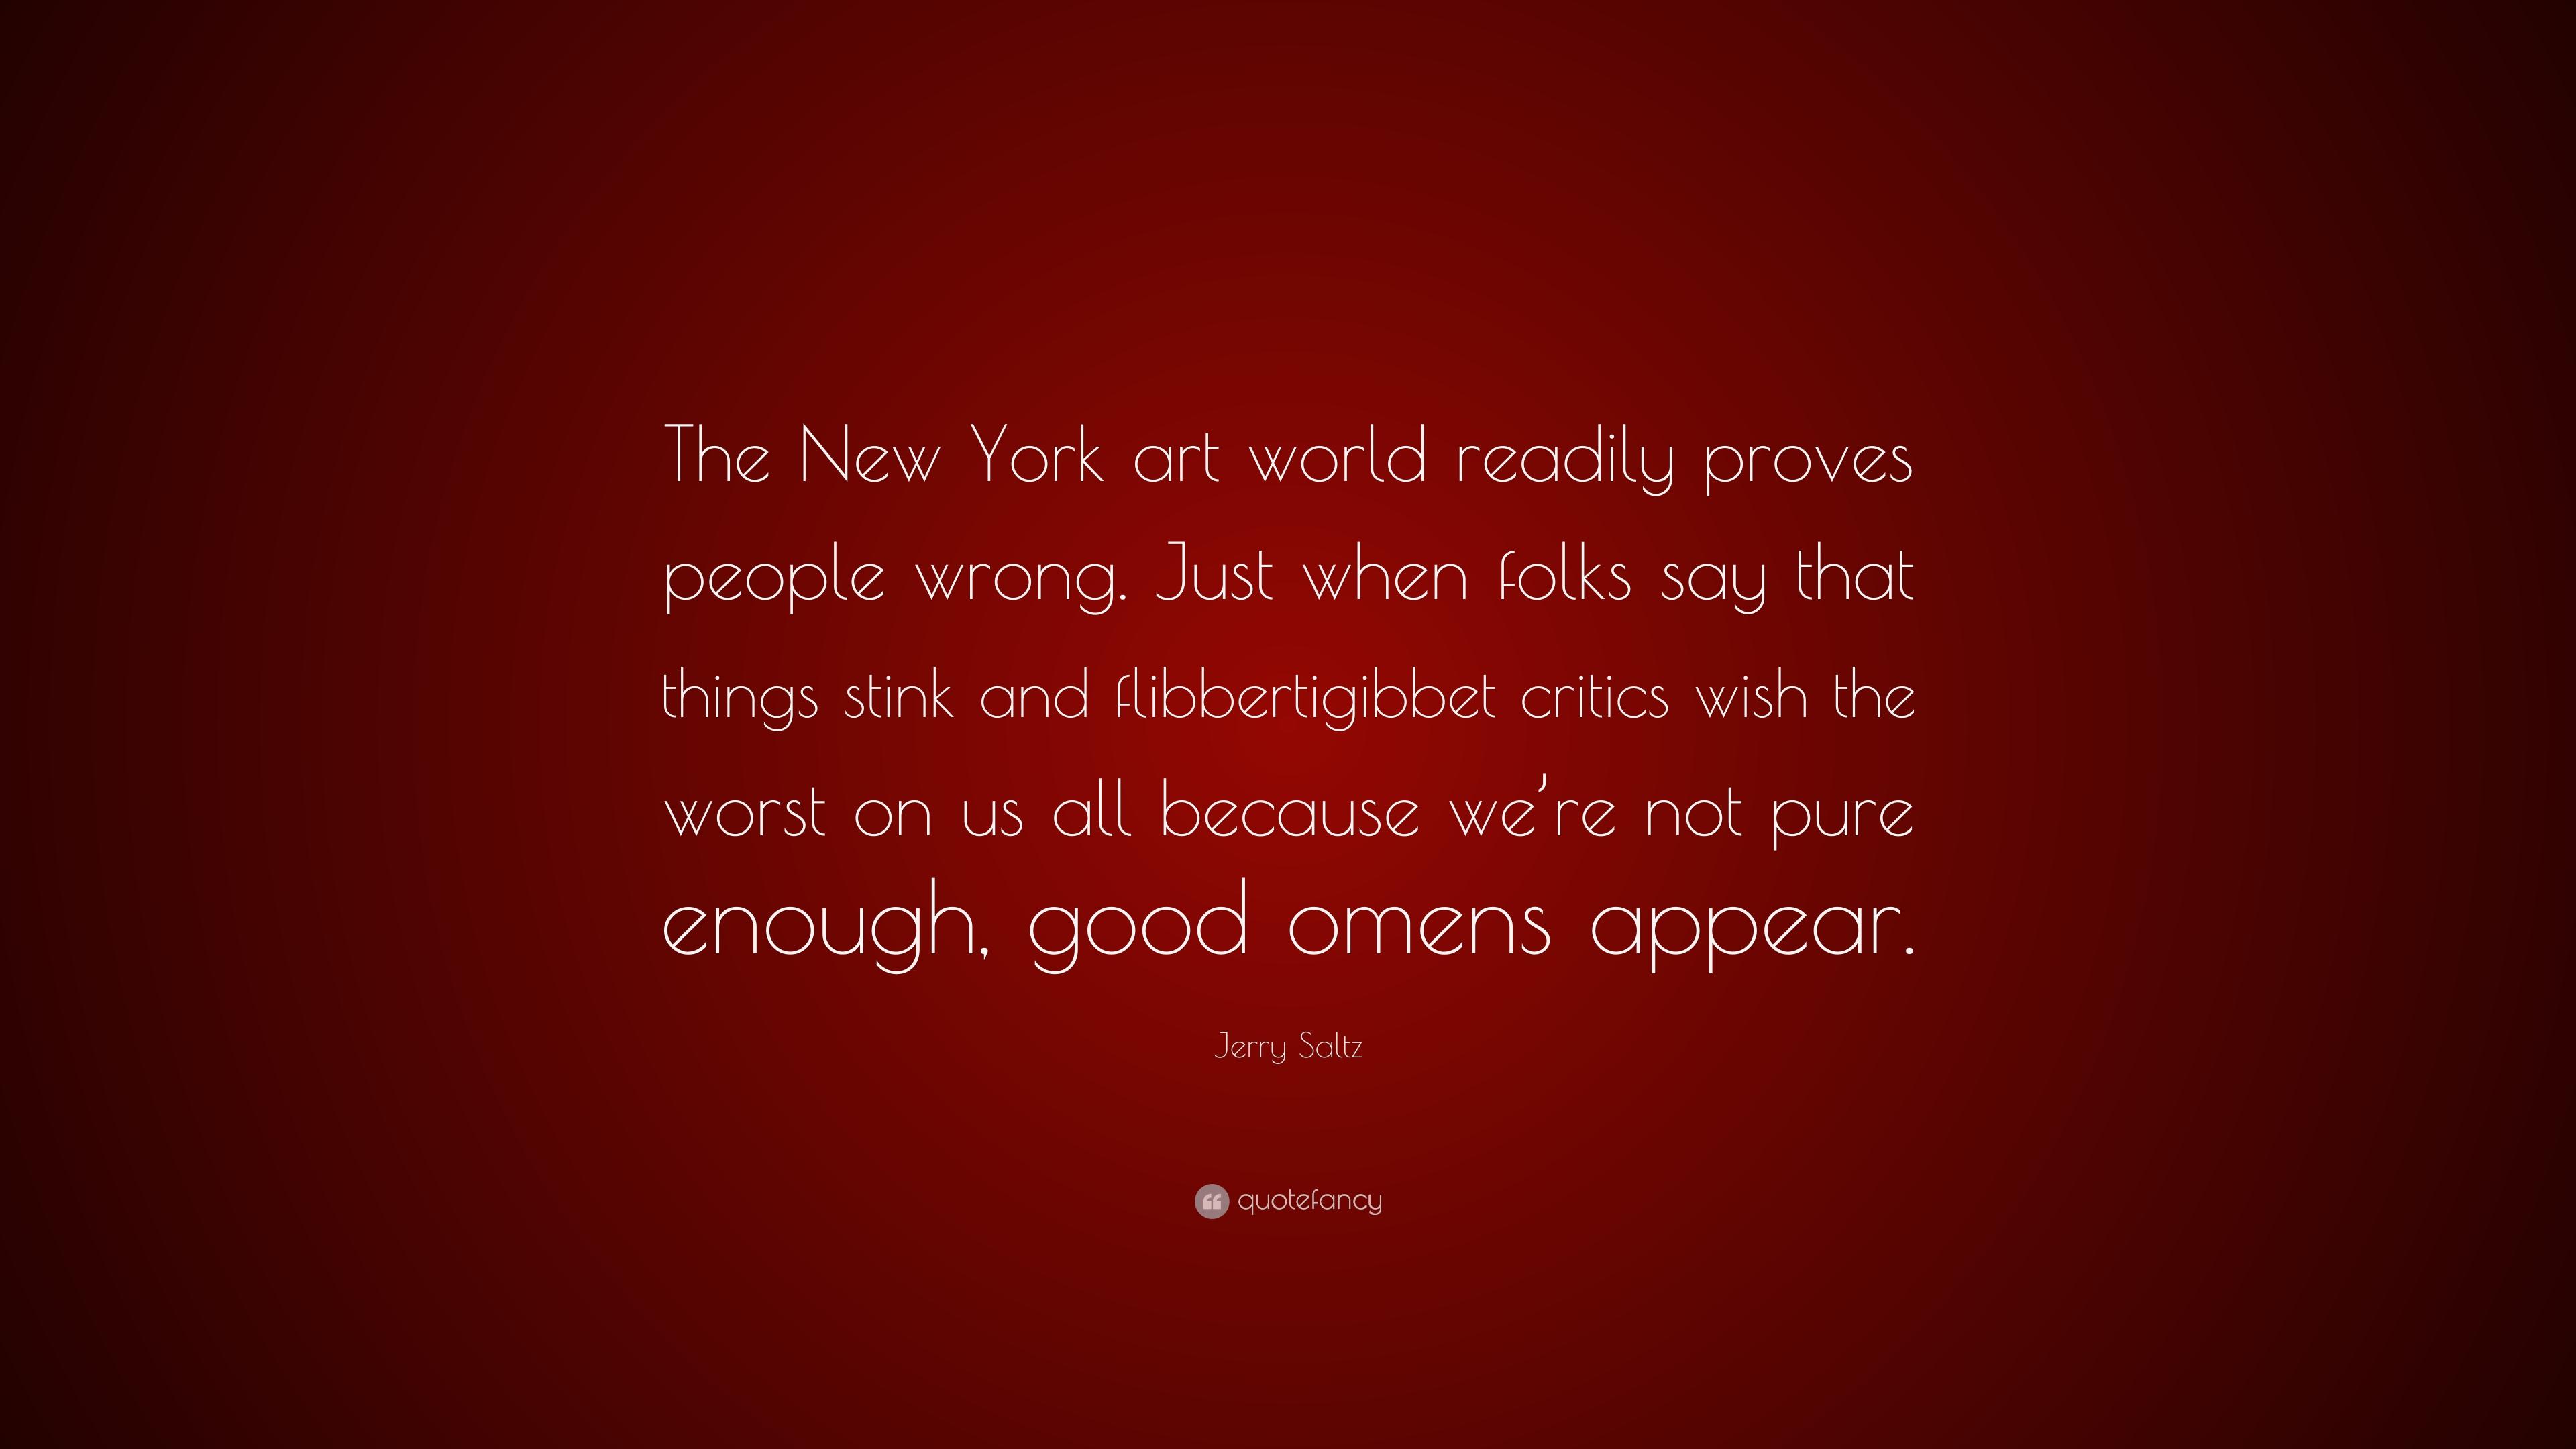 Jerry Saltz Quote: “The New York art world readily proves people